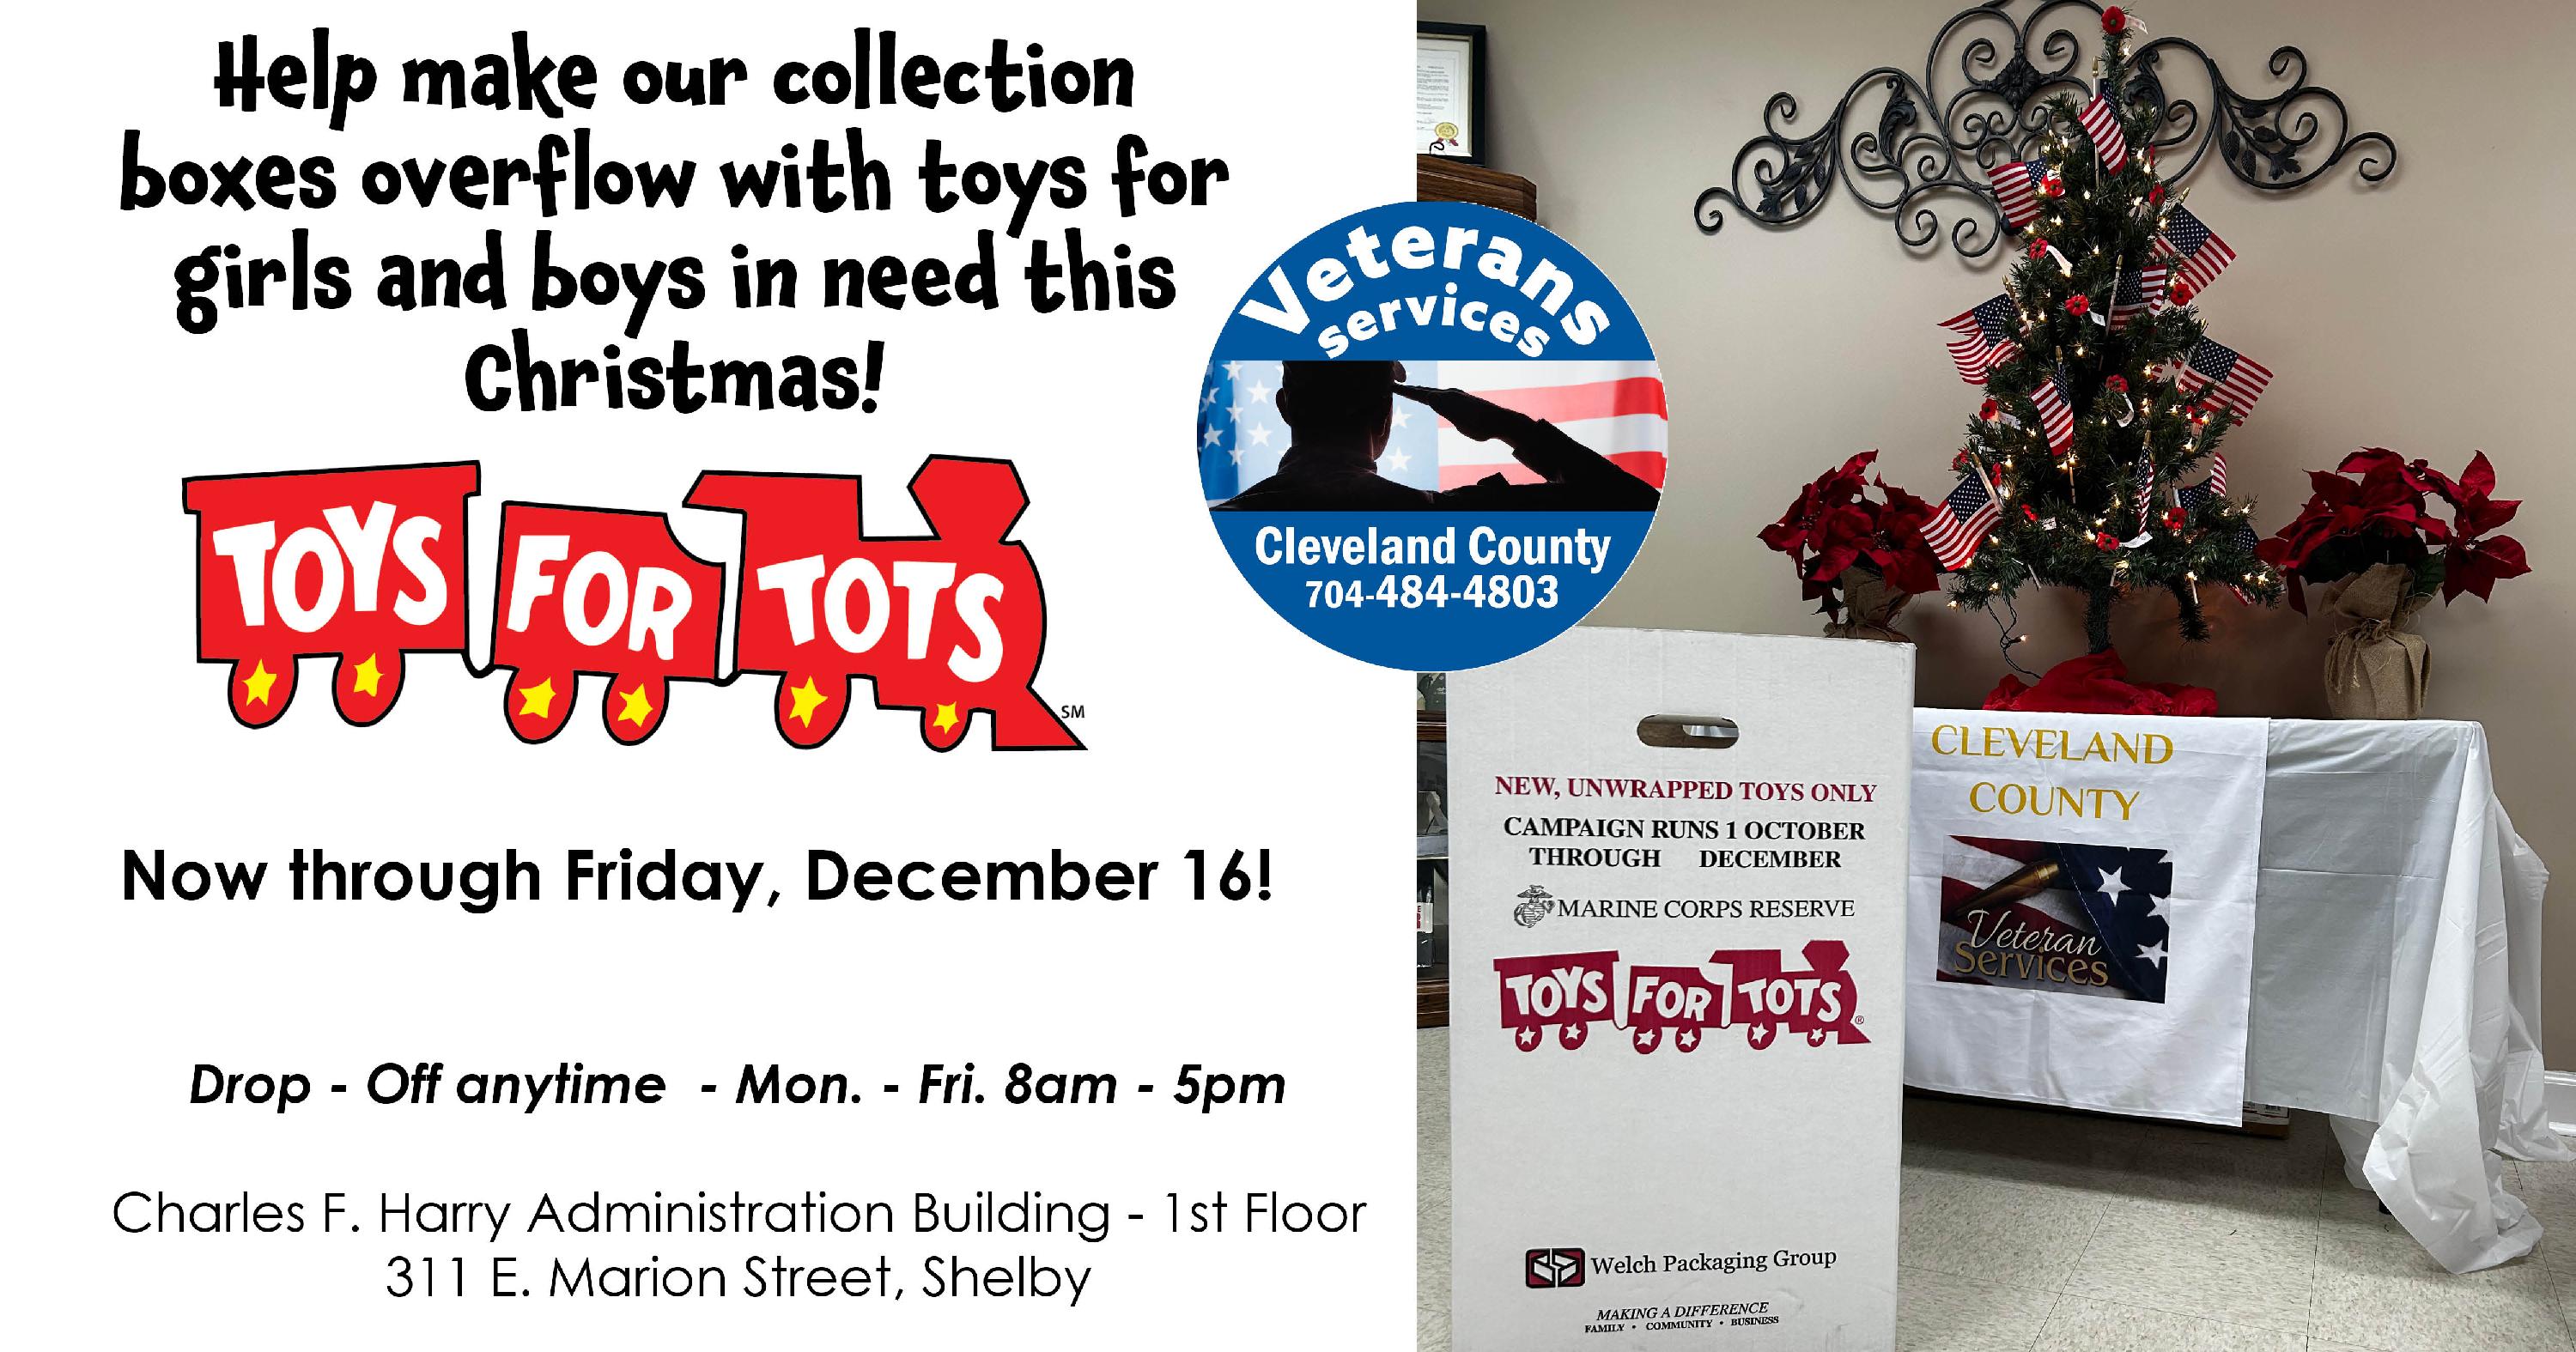 Toys for Tots collection